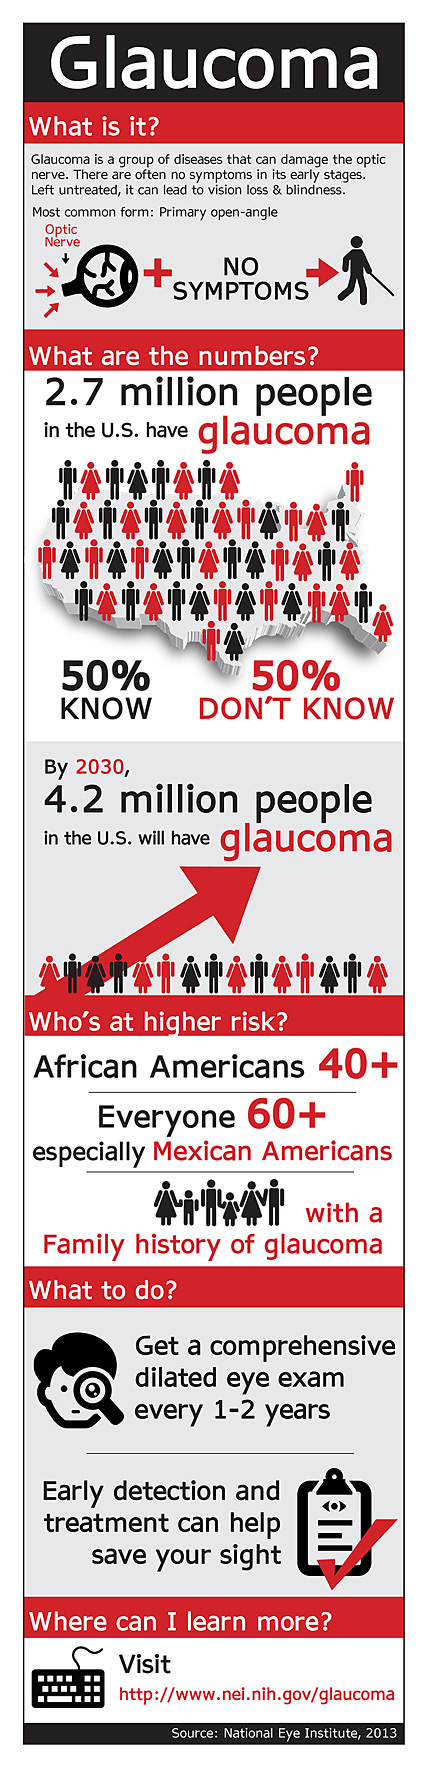 Glaucoma Infographic in English